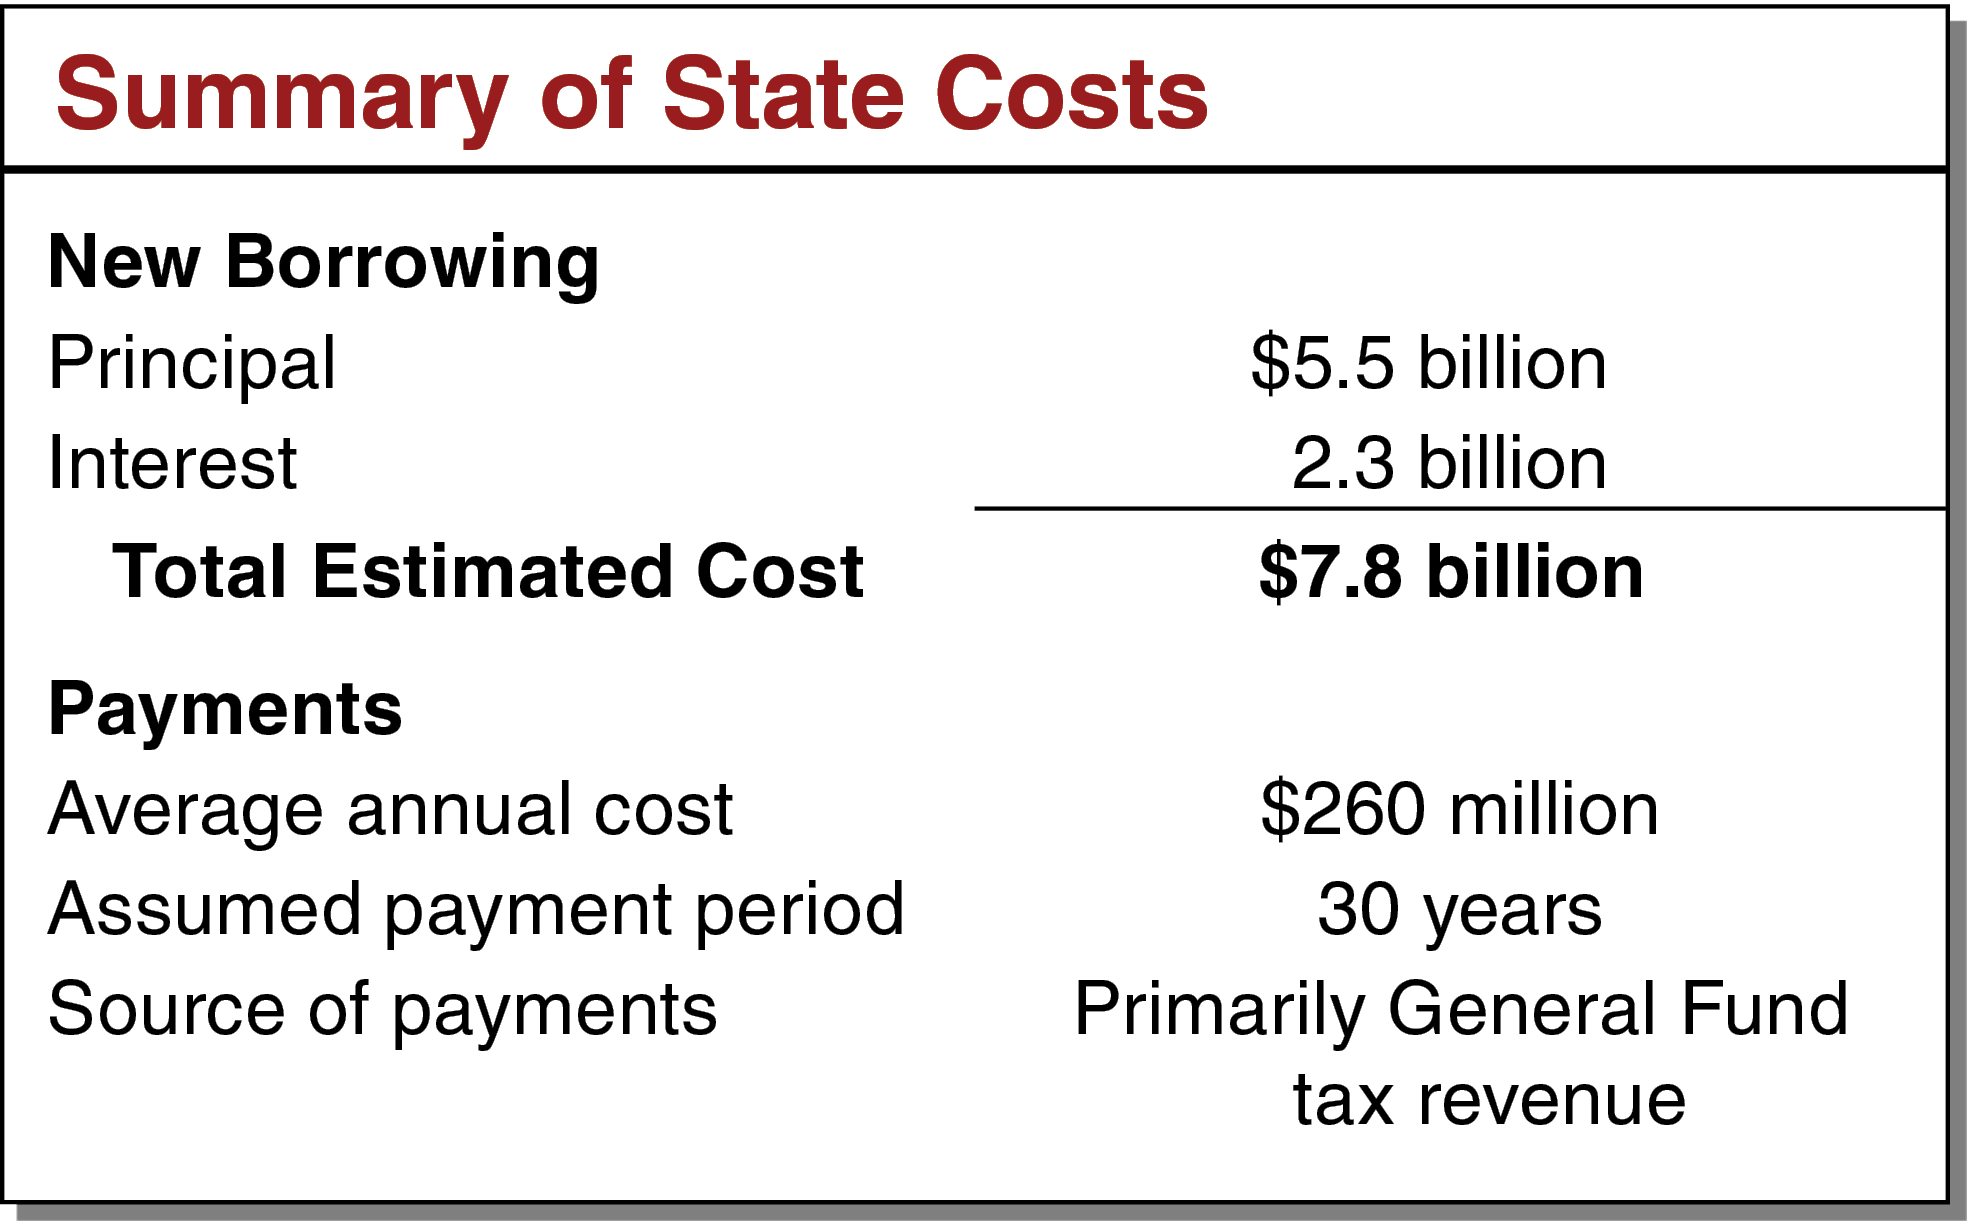 Summary of State Costs